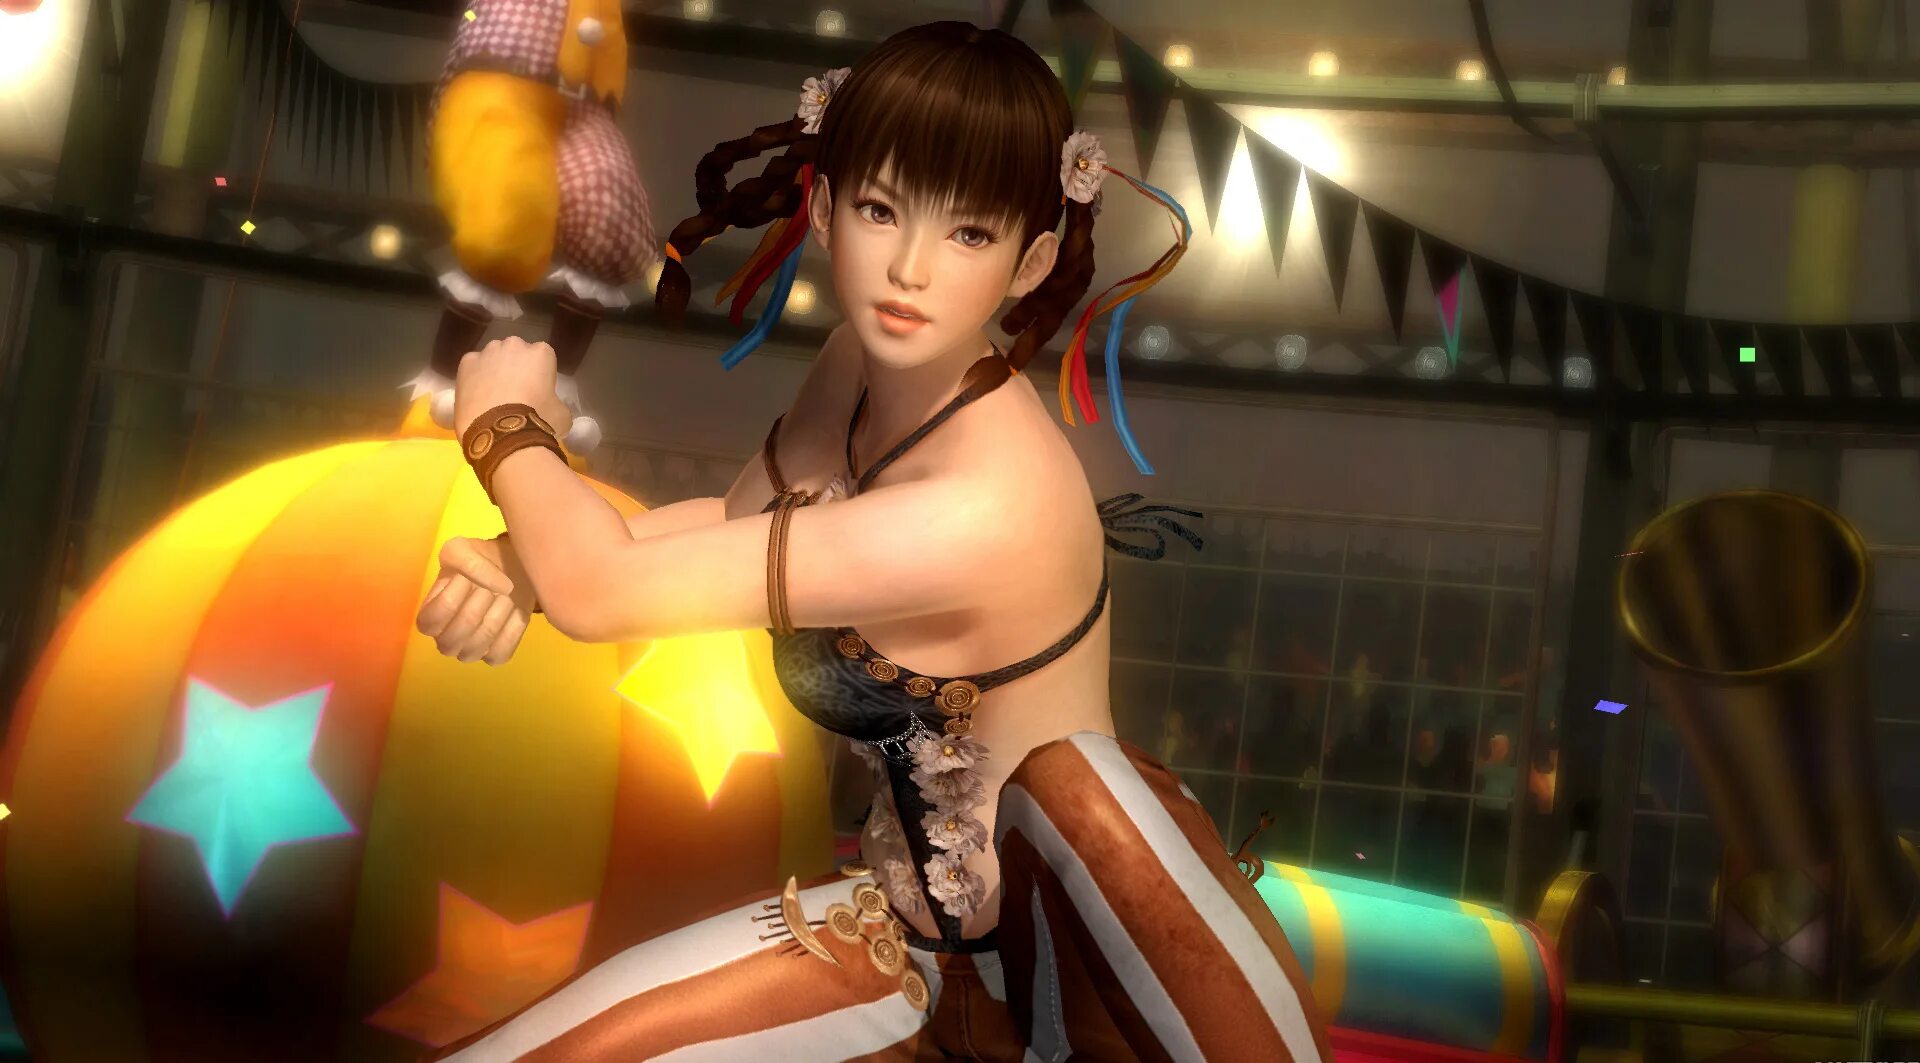 Dead or Alive лей Фанг. Dead or Alive 5. Dead or Alive 5 Lei Fang. Lei Fang (Doa). Новая японская игра